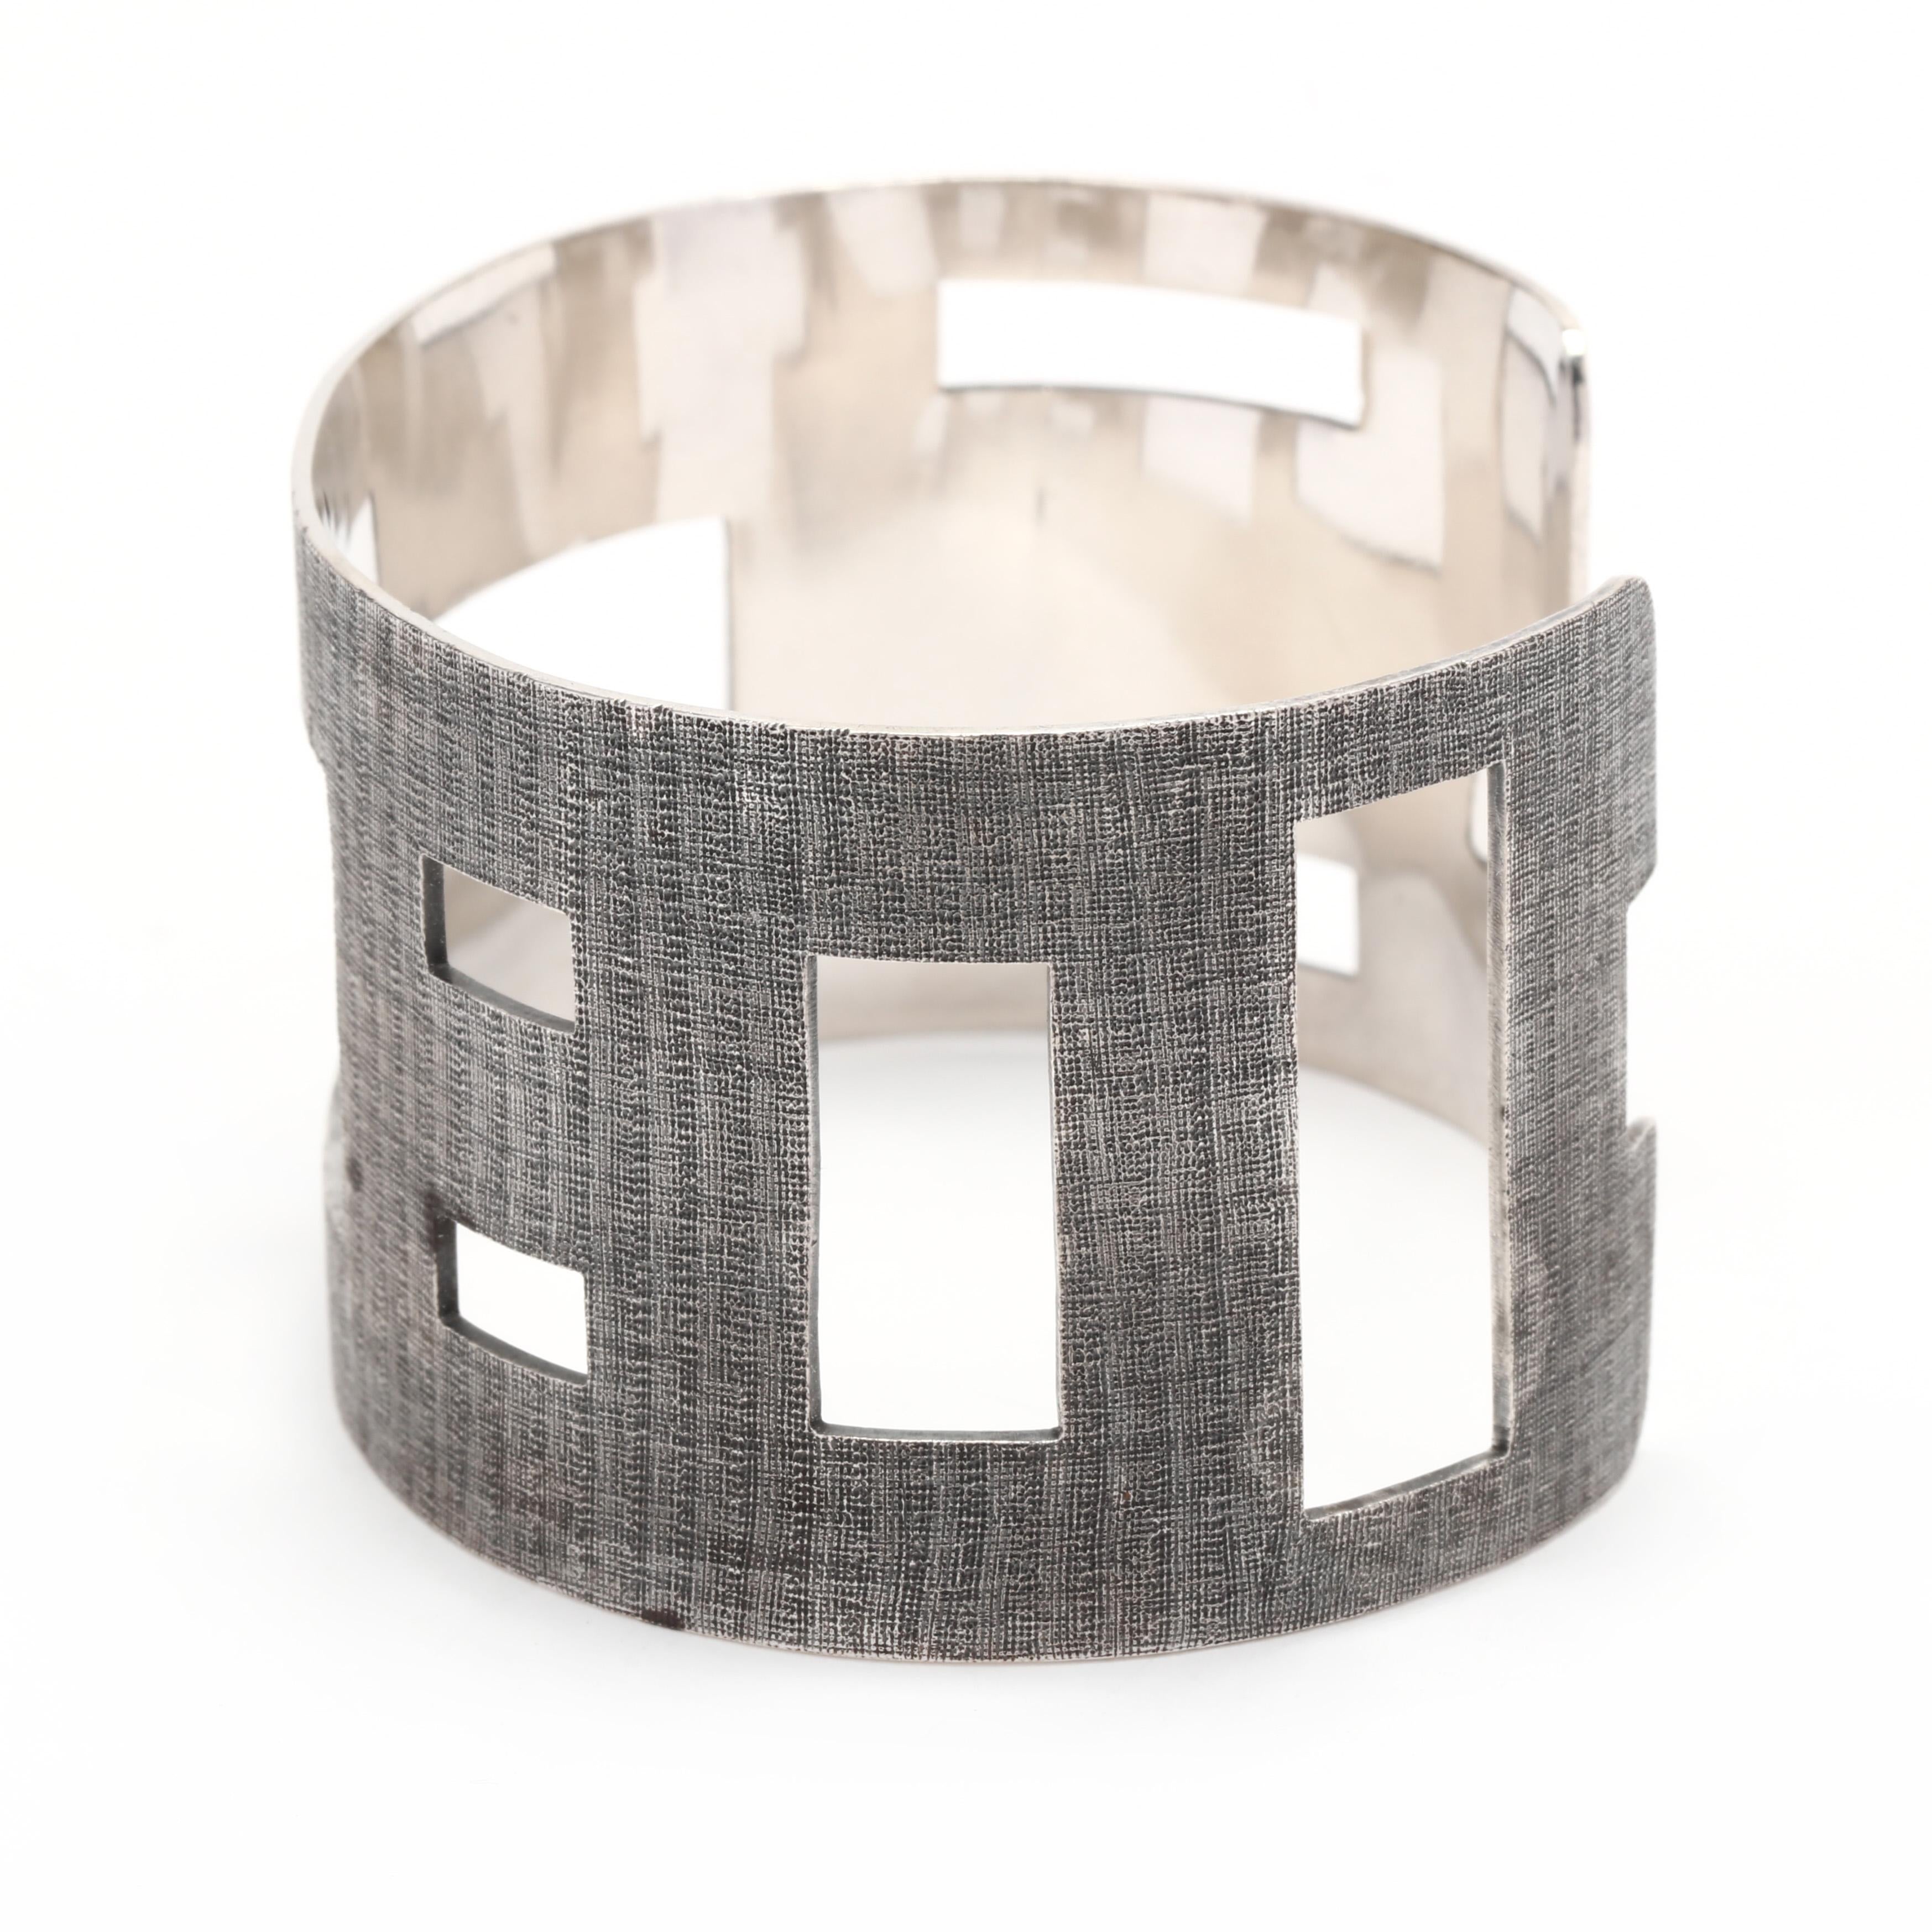 Geometric Cut-Out Cuff Bracelet, Sterling Silver, Length 7.5 inch, Wide Silver In Good Condition For Sale In McLeansville, NC